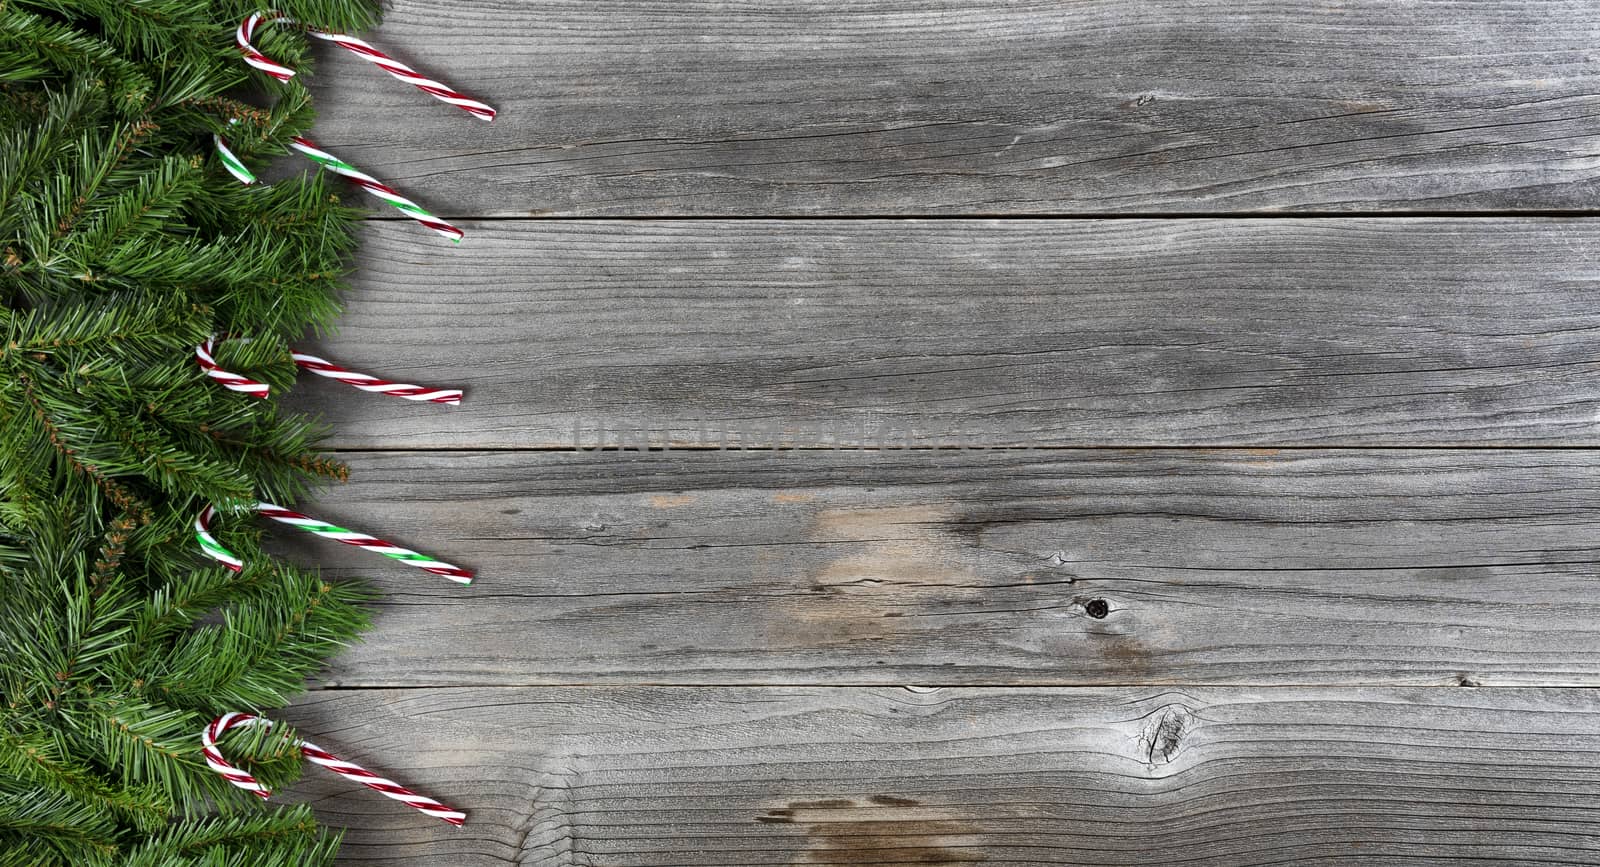 Merry Christmas and Happy New Year holiday concept with candy cane decorations on left side of weathered wooden boards